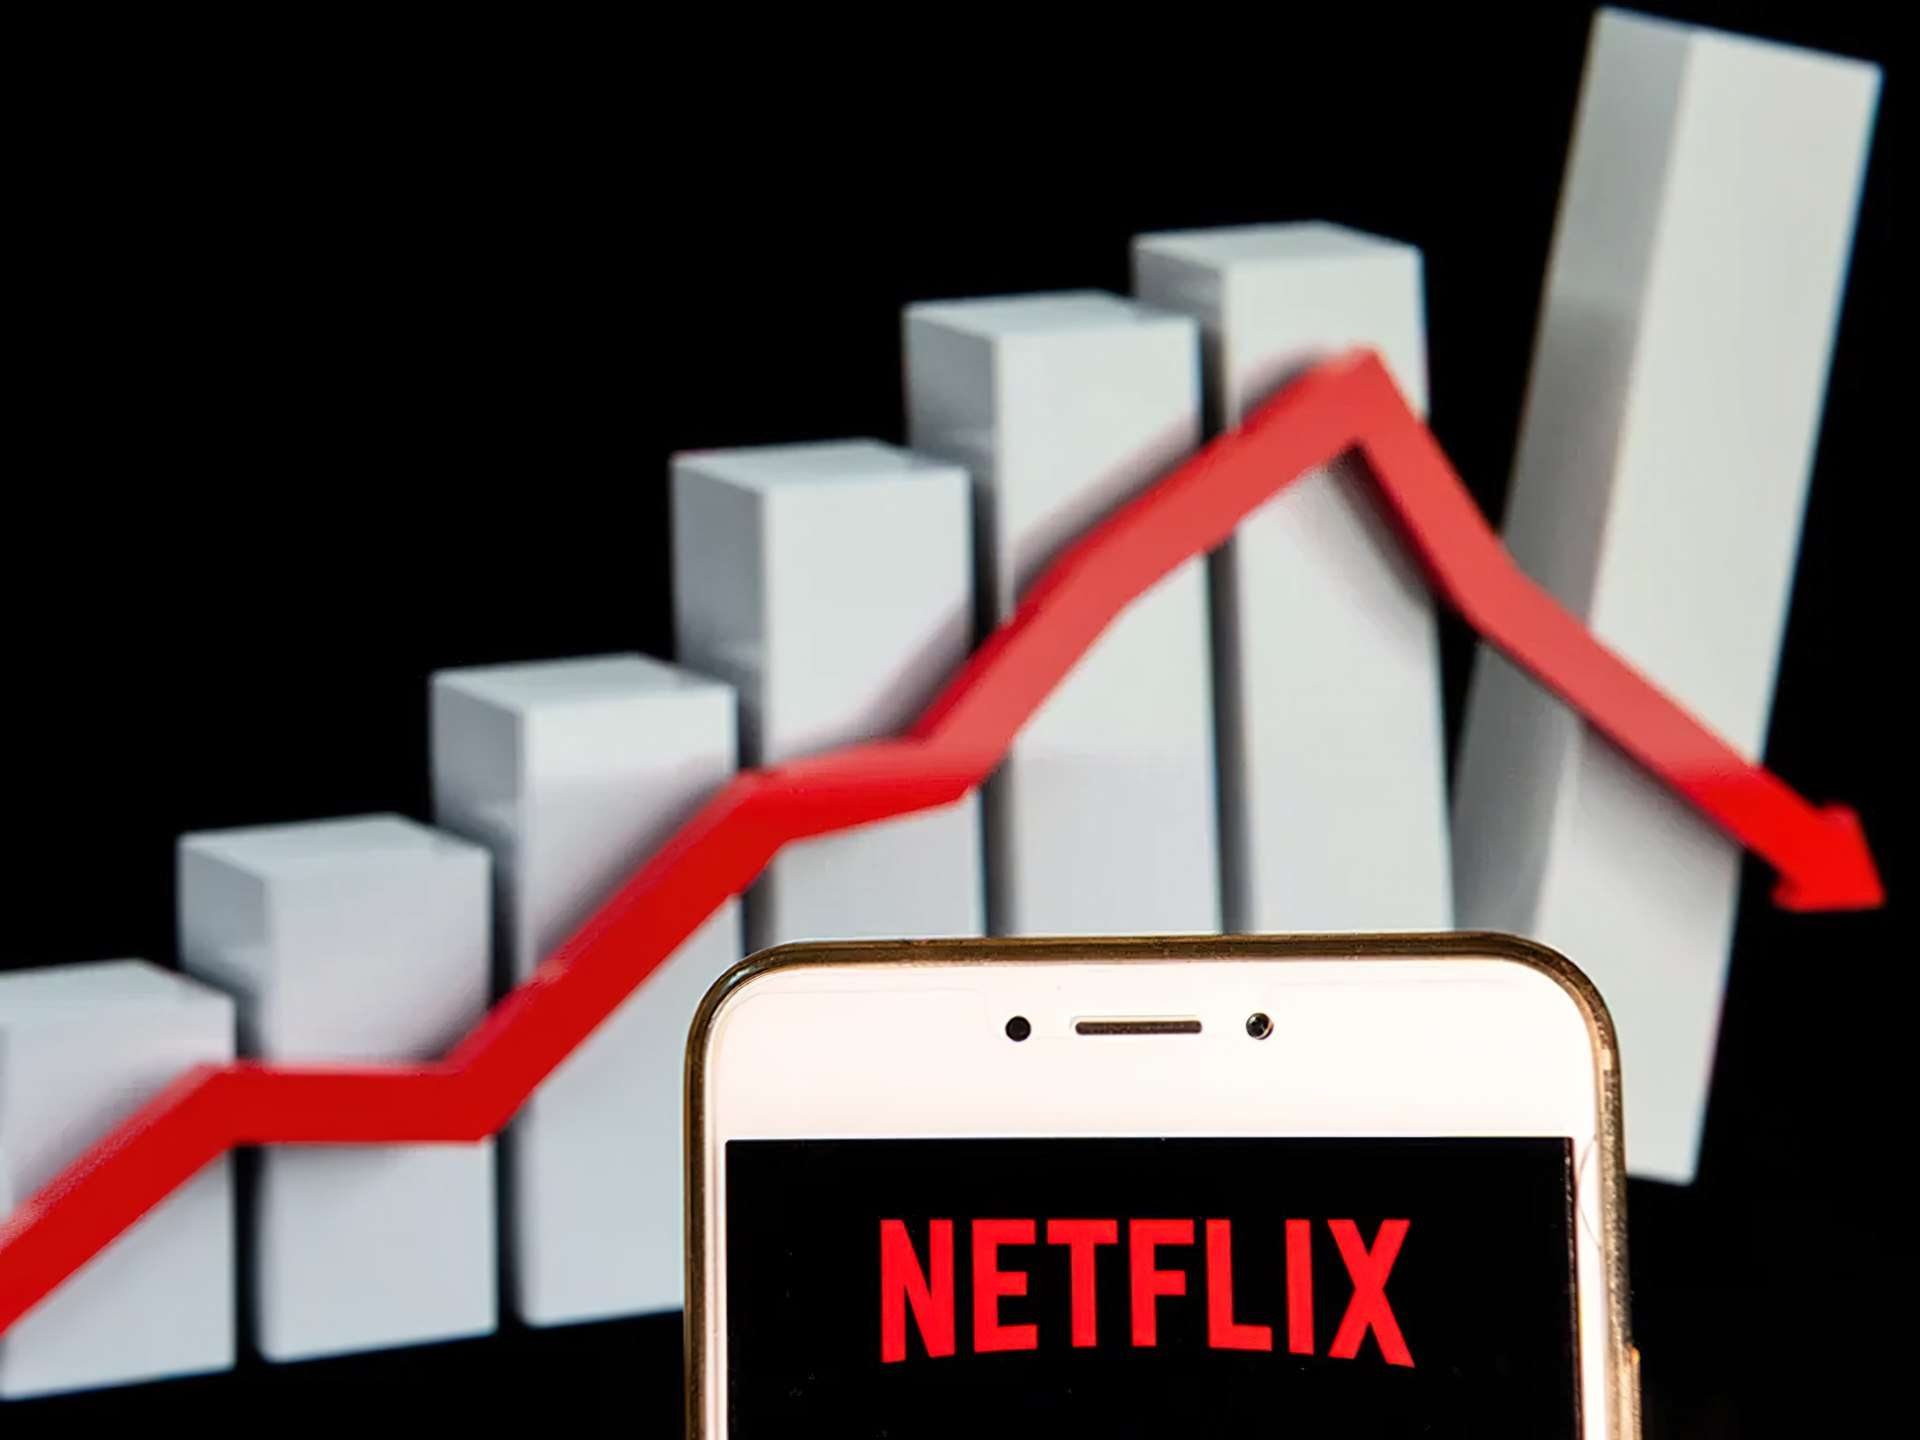 Why Netflix lost subscribers for the first time in a decade?